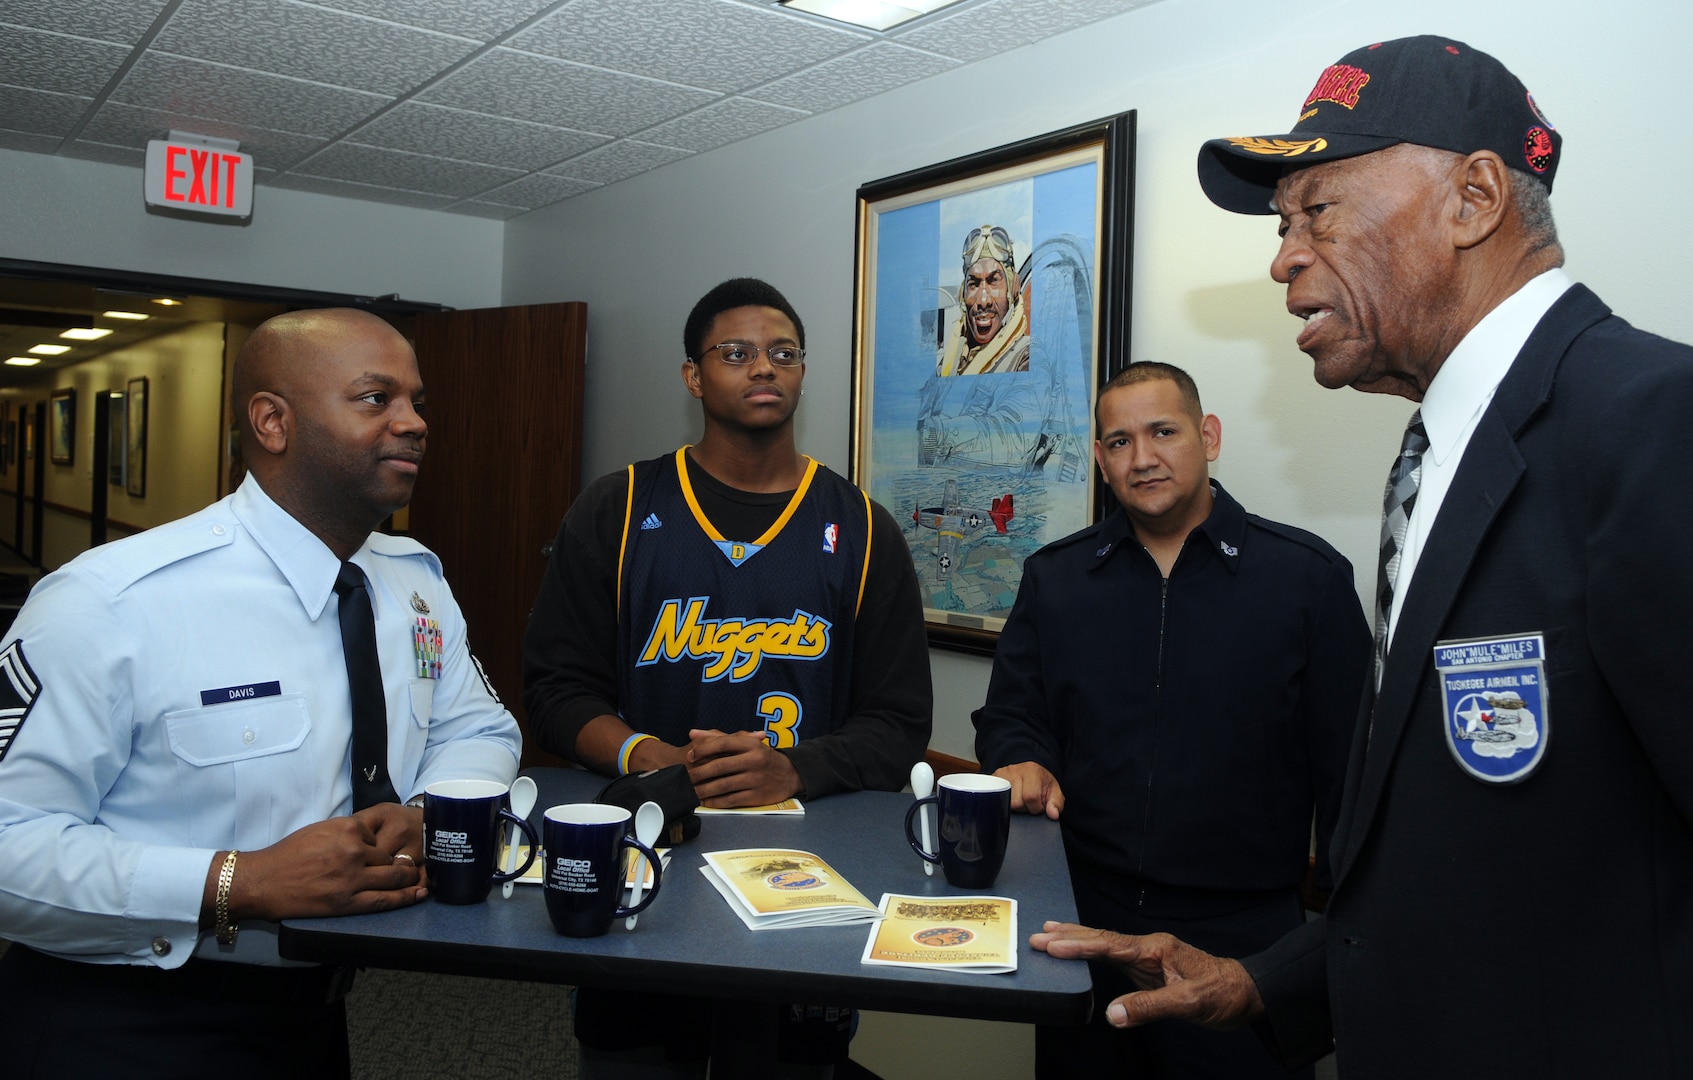 John "Mule" Miles, a Tuskegee Airman aircraft mechanic and former Negro Baseball League Chicago American "Giants" baseball player, speaks with guests at the First Tuskegee Heritage Breakfast Feb. 9 at the 99th Flying Training Squadron. Activated on March 22, 1941, the 99th FTS was originally designated as the 99th Pursuit Squadron, and was better known as the "Tuskegee Airmen," the first all-black unit in the U.S. Army Air Corps. (U.S. Air Force photo by Rich McFadden)